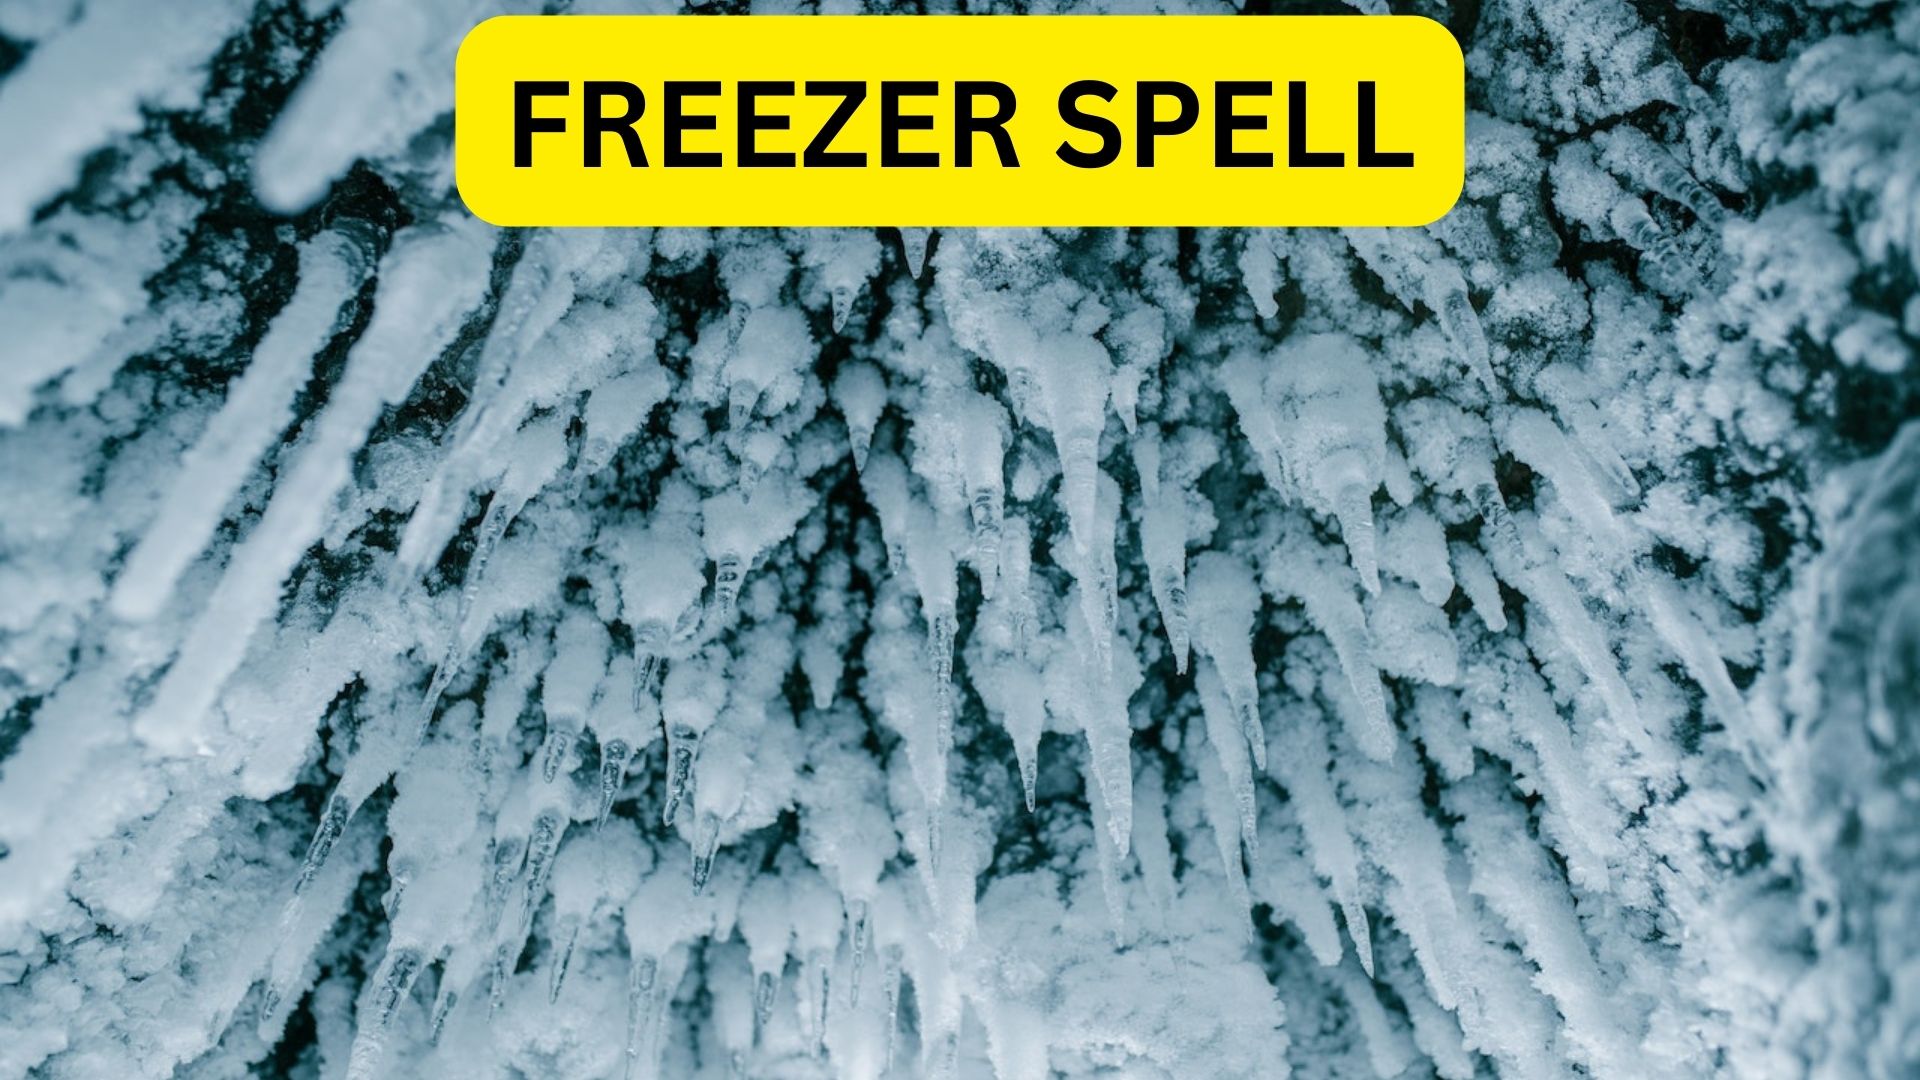 Freezer Spell - How Does It Work?